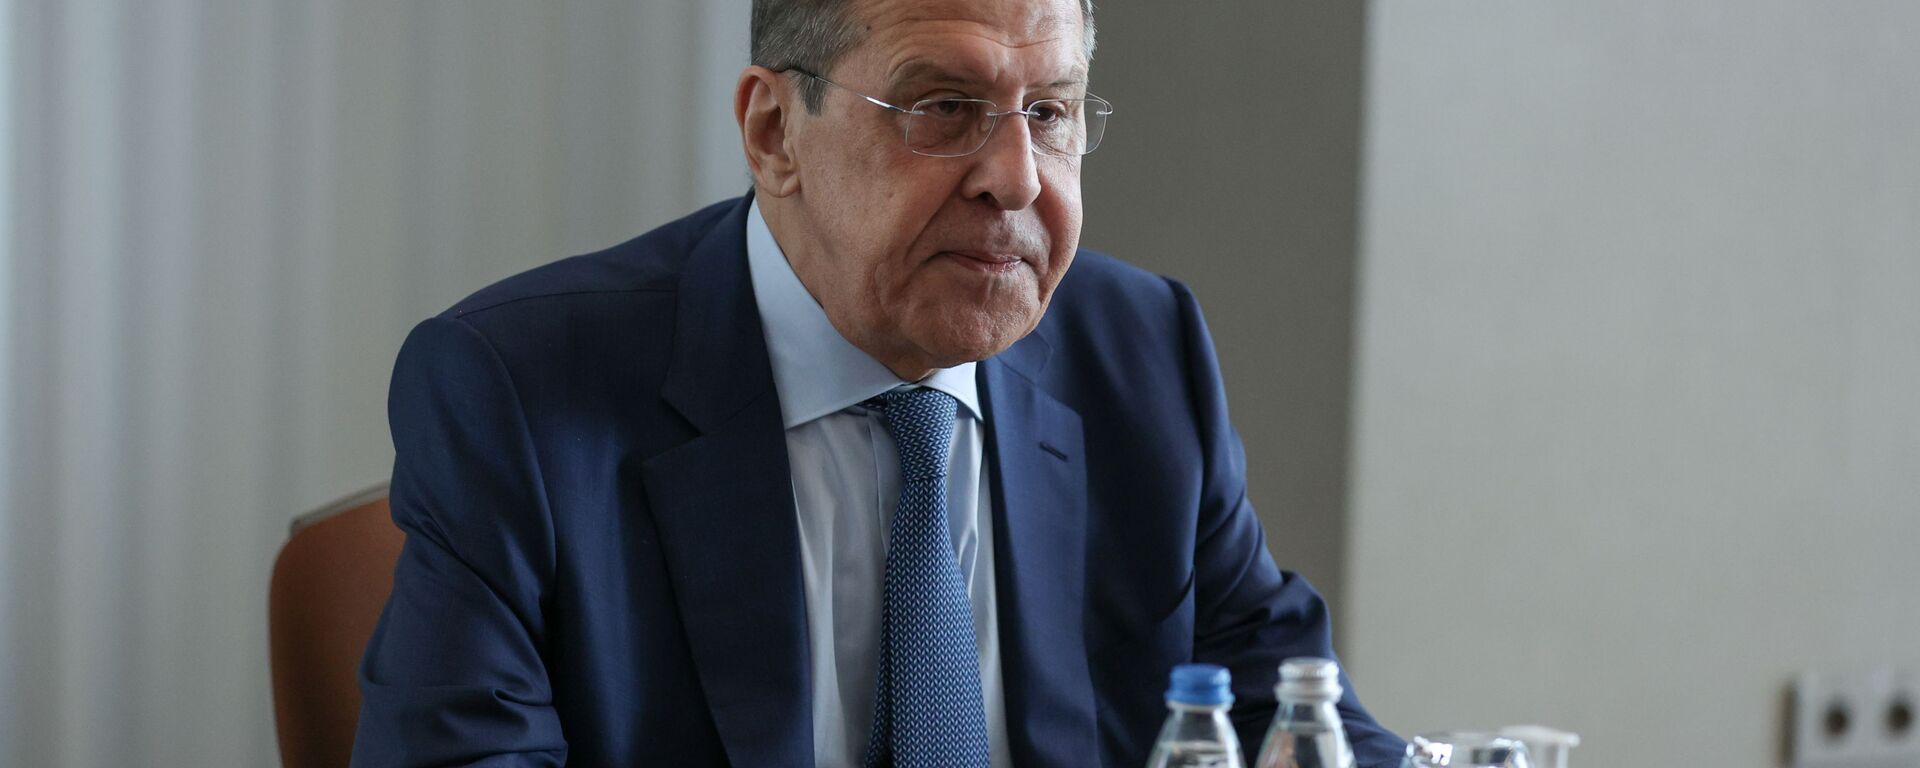 Russian Foreign Minister Sergei Lavrov attends a meeting with his Greek counterpart Nikos Dendias in Sochi, Russia May 24, 2021. - Sputnik International, 1920, 01.11.2021